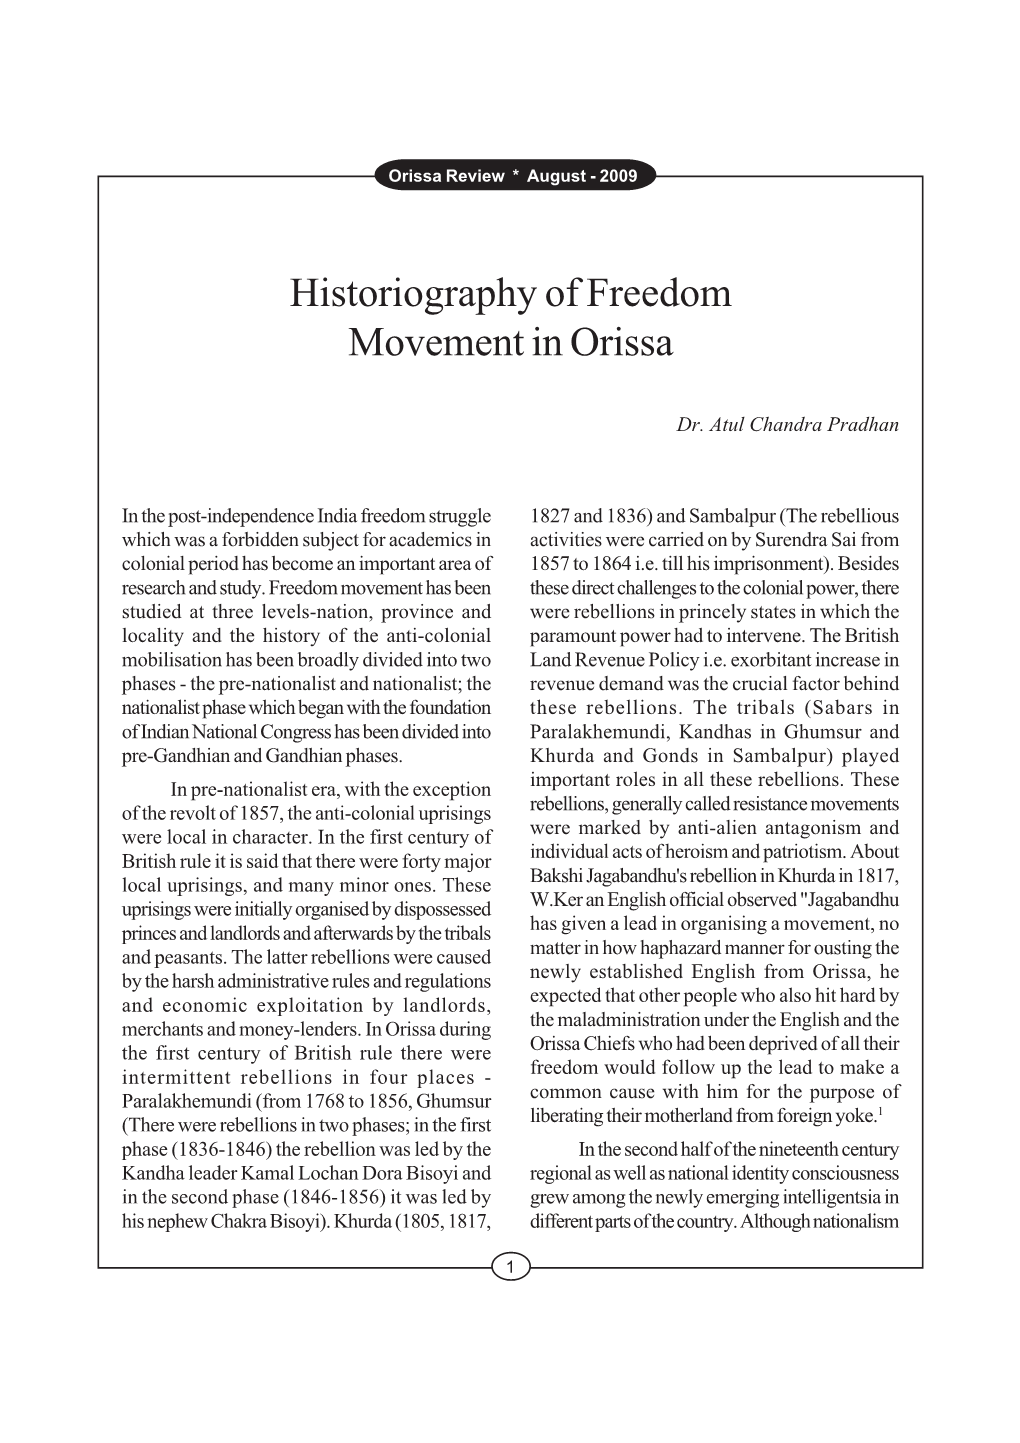 Historiography of Freedom Movement in Orissa